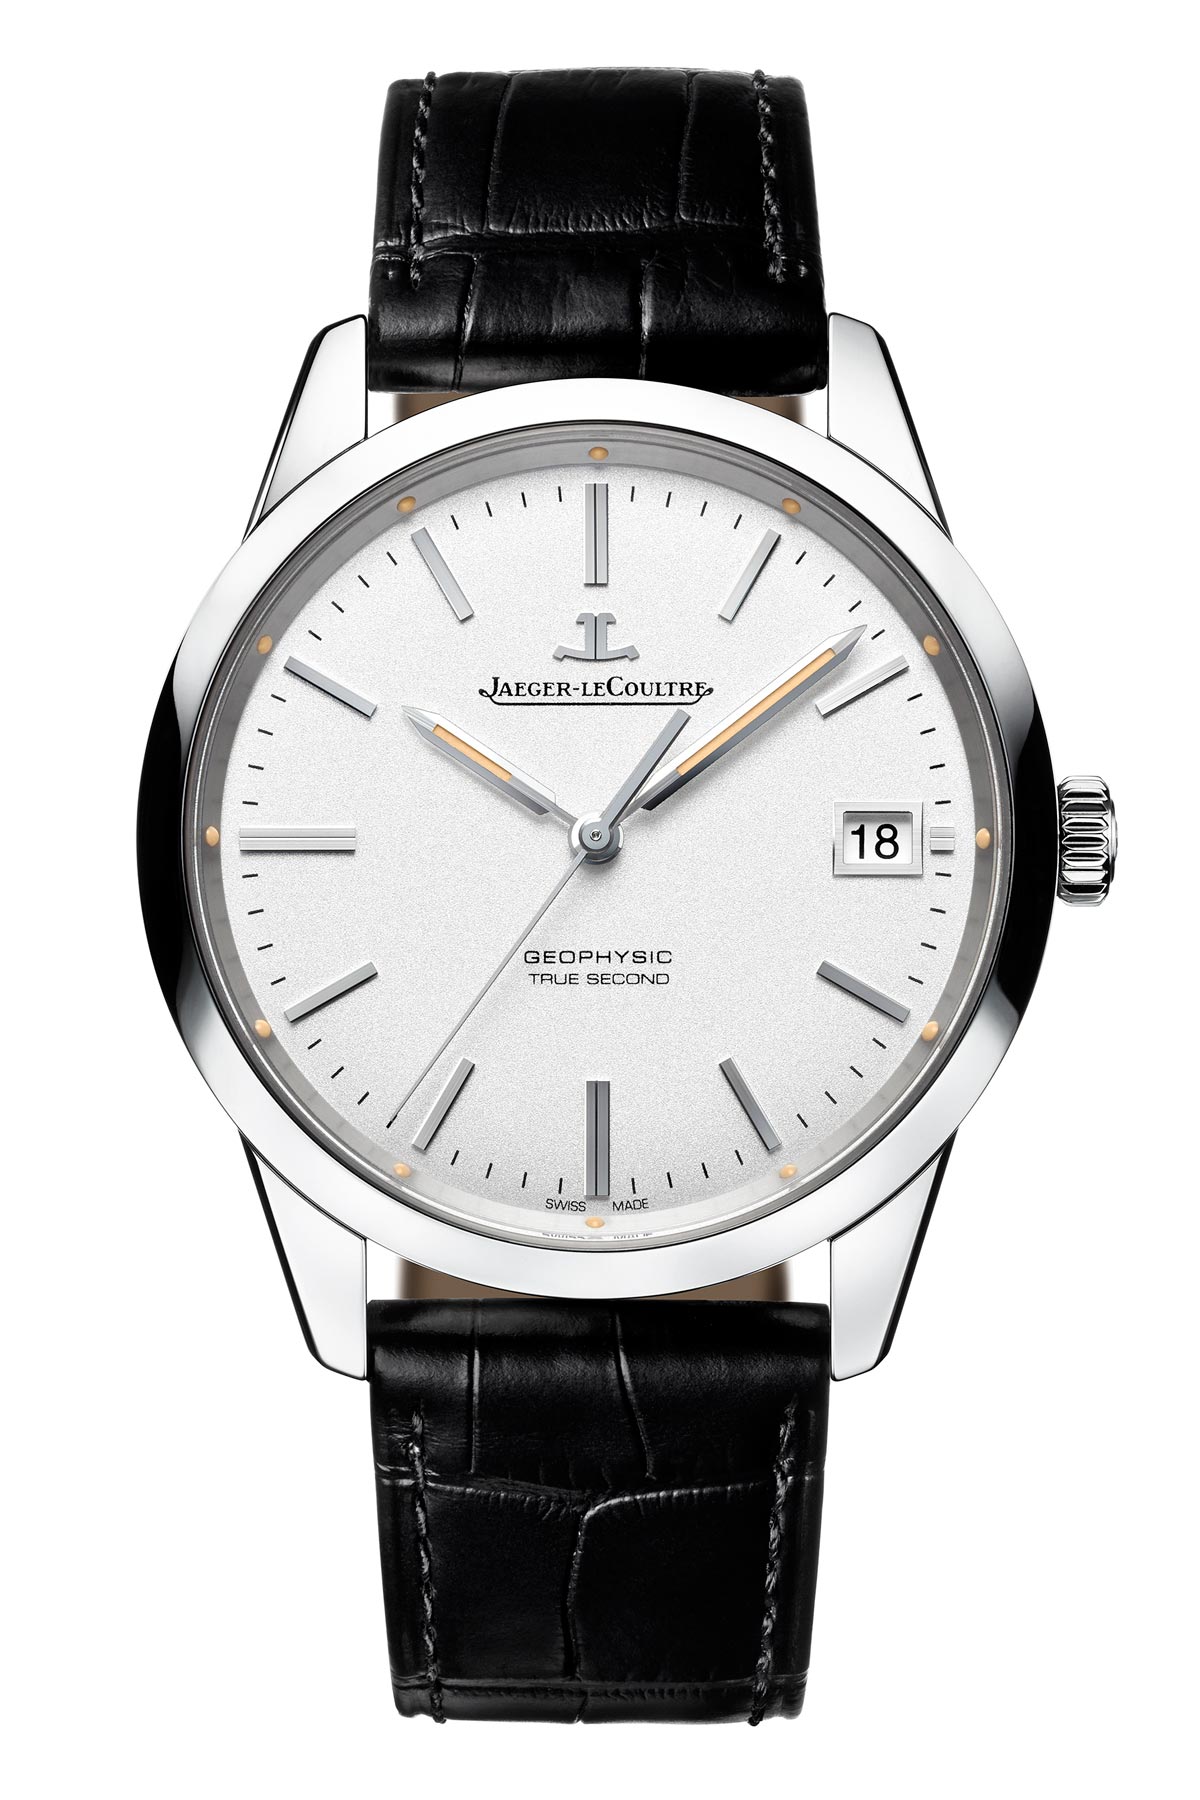 Jaeger-LeCoultre Geophysic True Second stainless steel full front